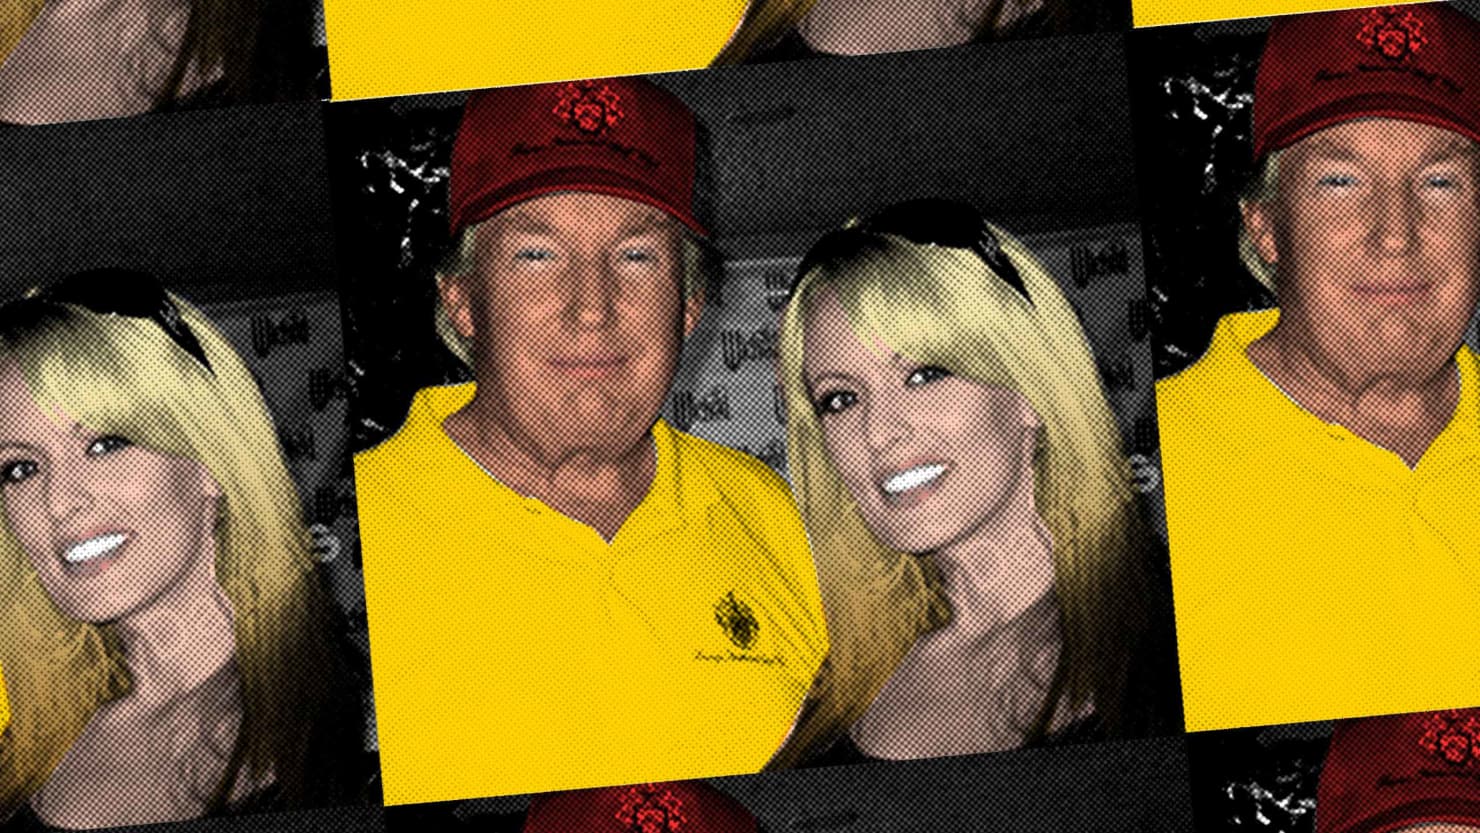 Stormy Daniels - 'I ended up with Donald in his hotel room. Picture him chasing me around his hotel room in his tighty-whities.' How many golden showers did you get, Donnie?